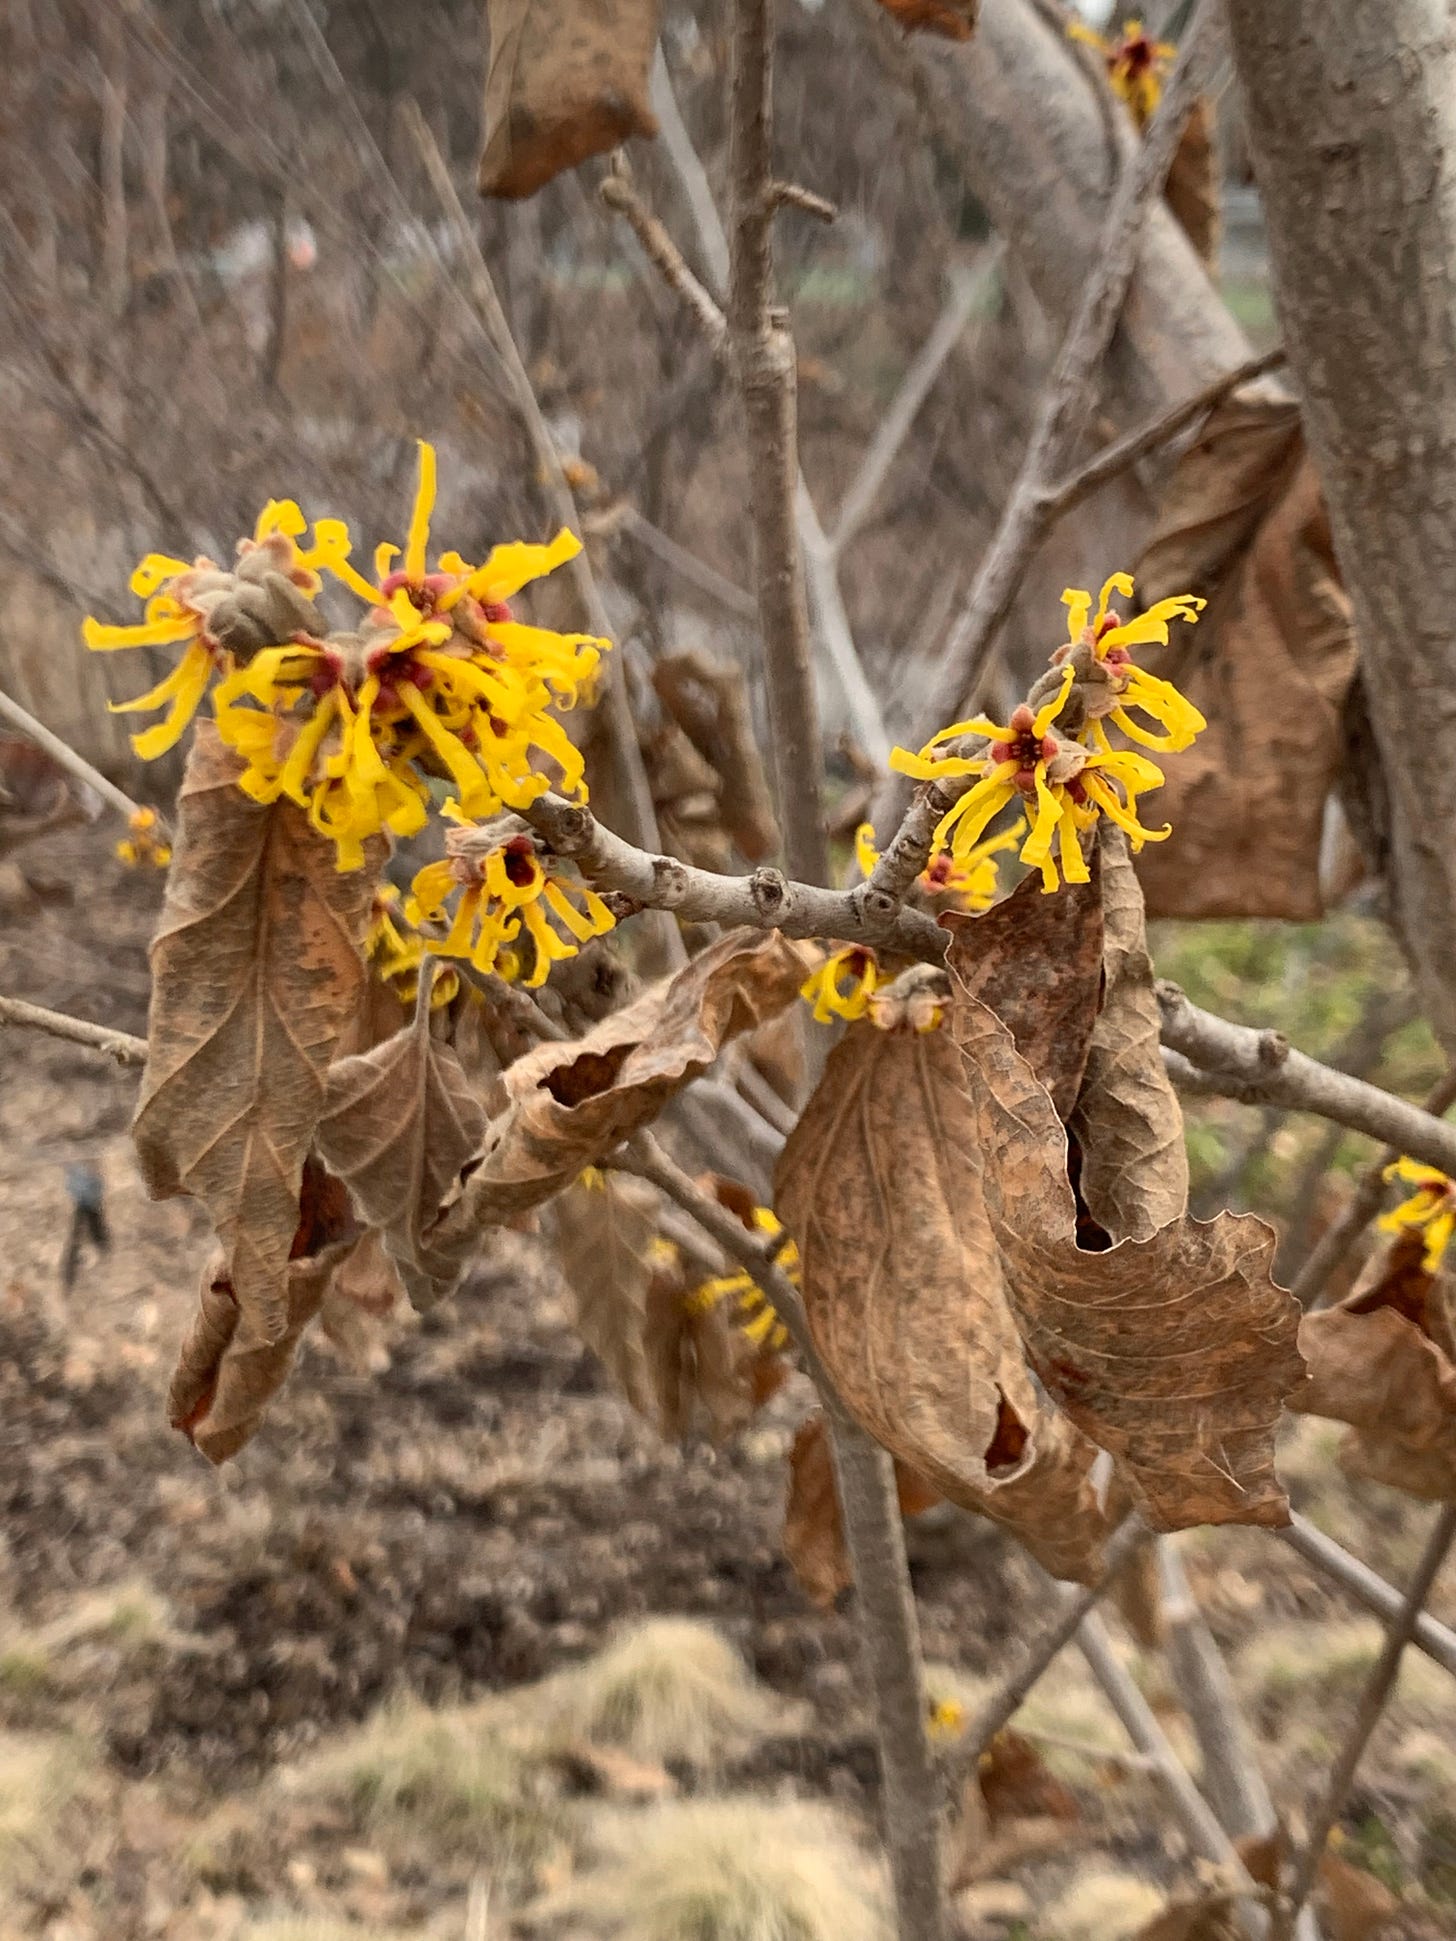 Bright yellow flowers with red centers on a mostly bare branch with a few straggling brown leaves still clinging to it.